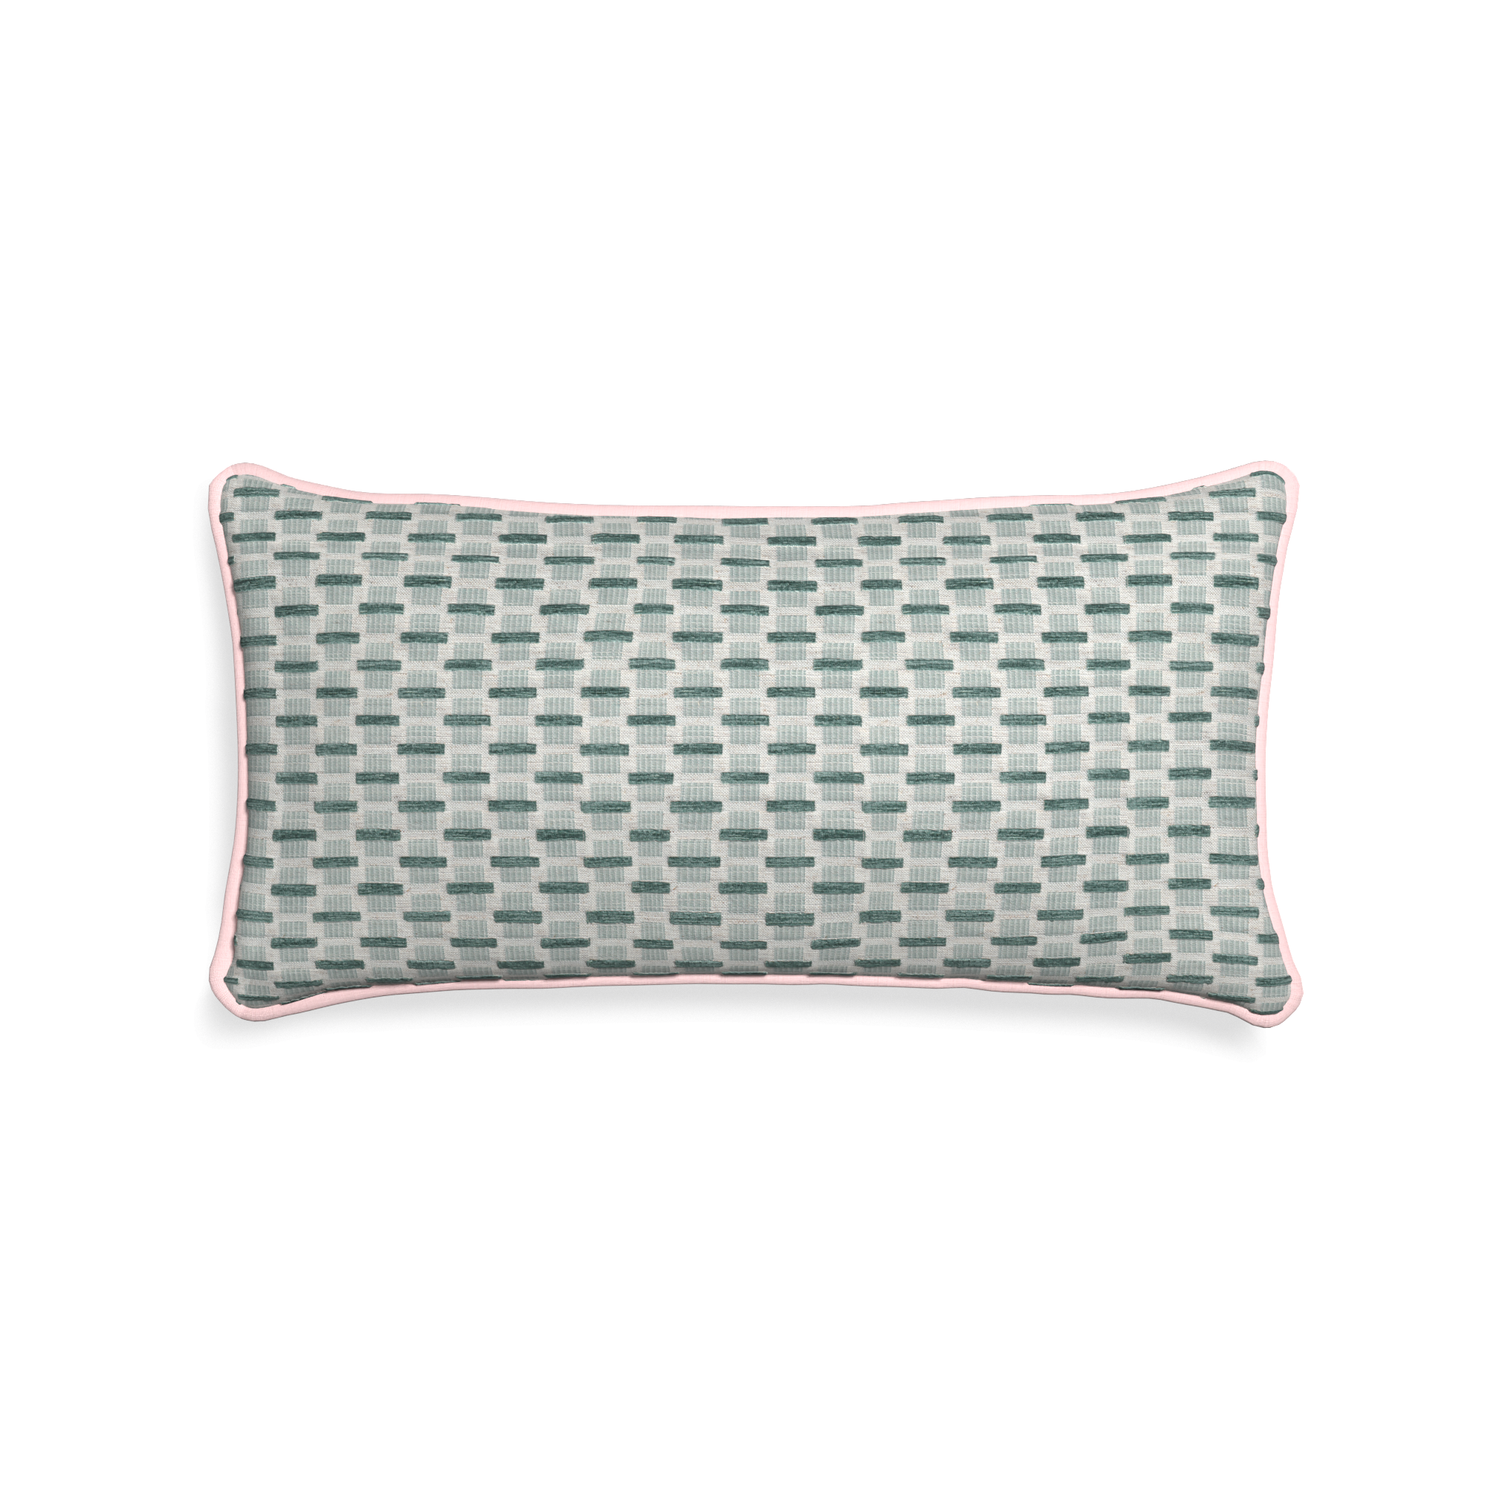 Midi-lumbar willow mint custom green geometric chenillepillow with petal piping on white background